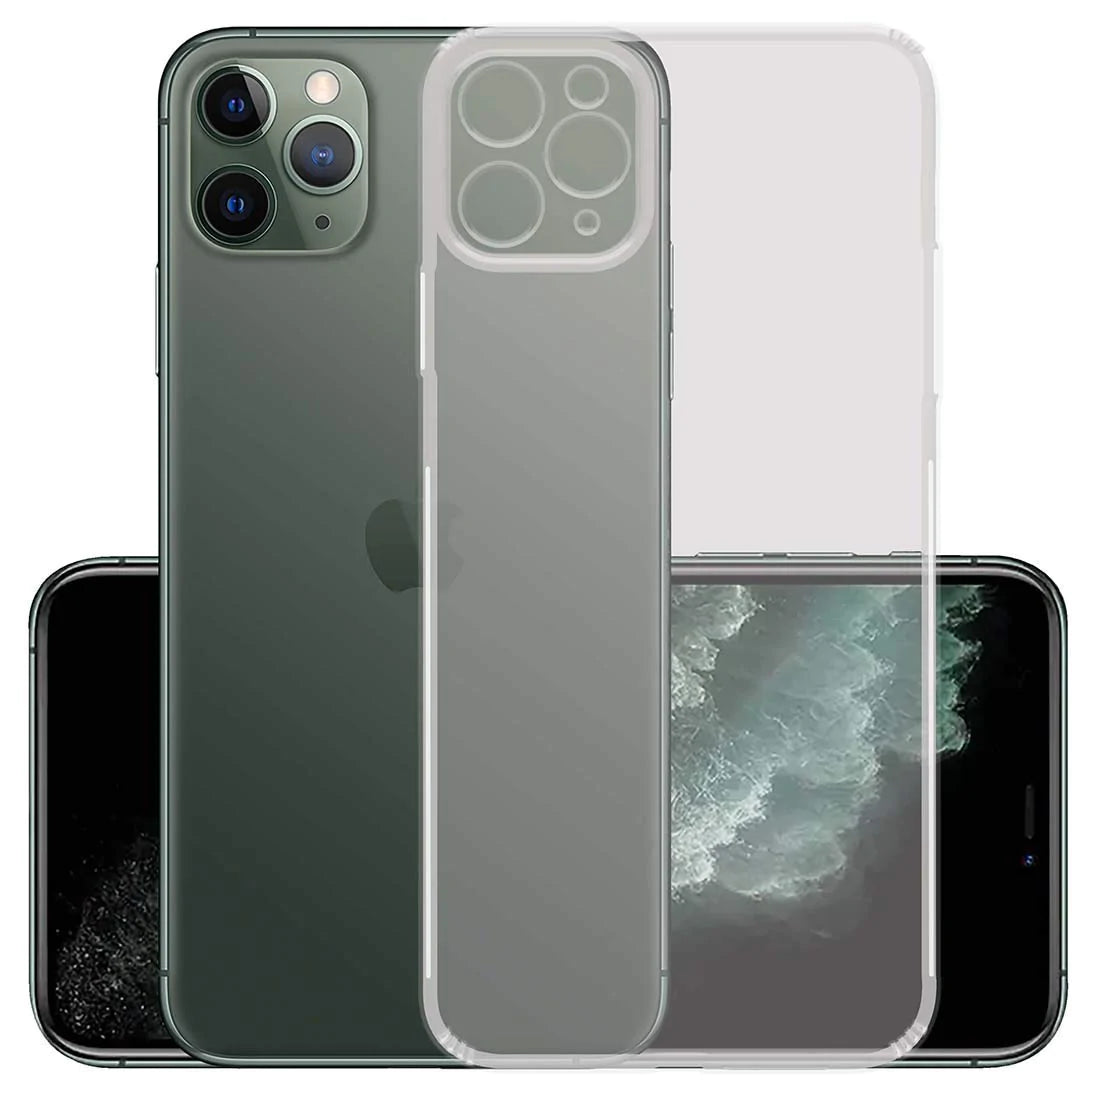 Transparent Silicone Mobile Back Cover for iPhone 11 PRO MAX (Soft & Flexible Back Cover)